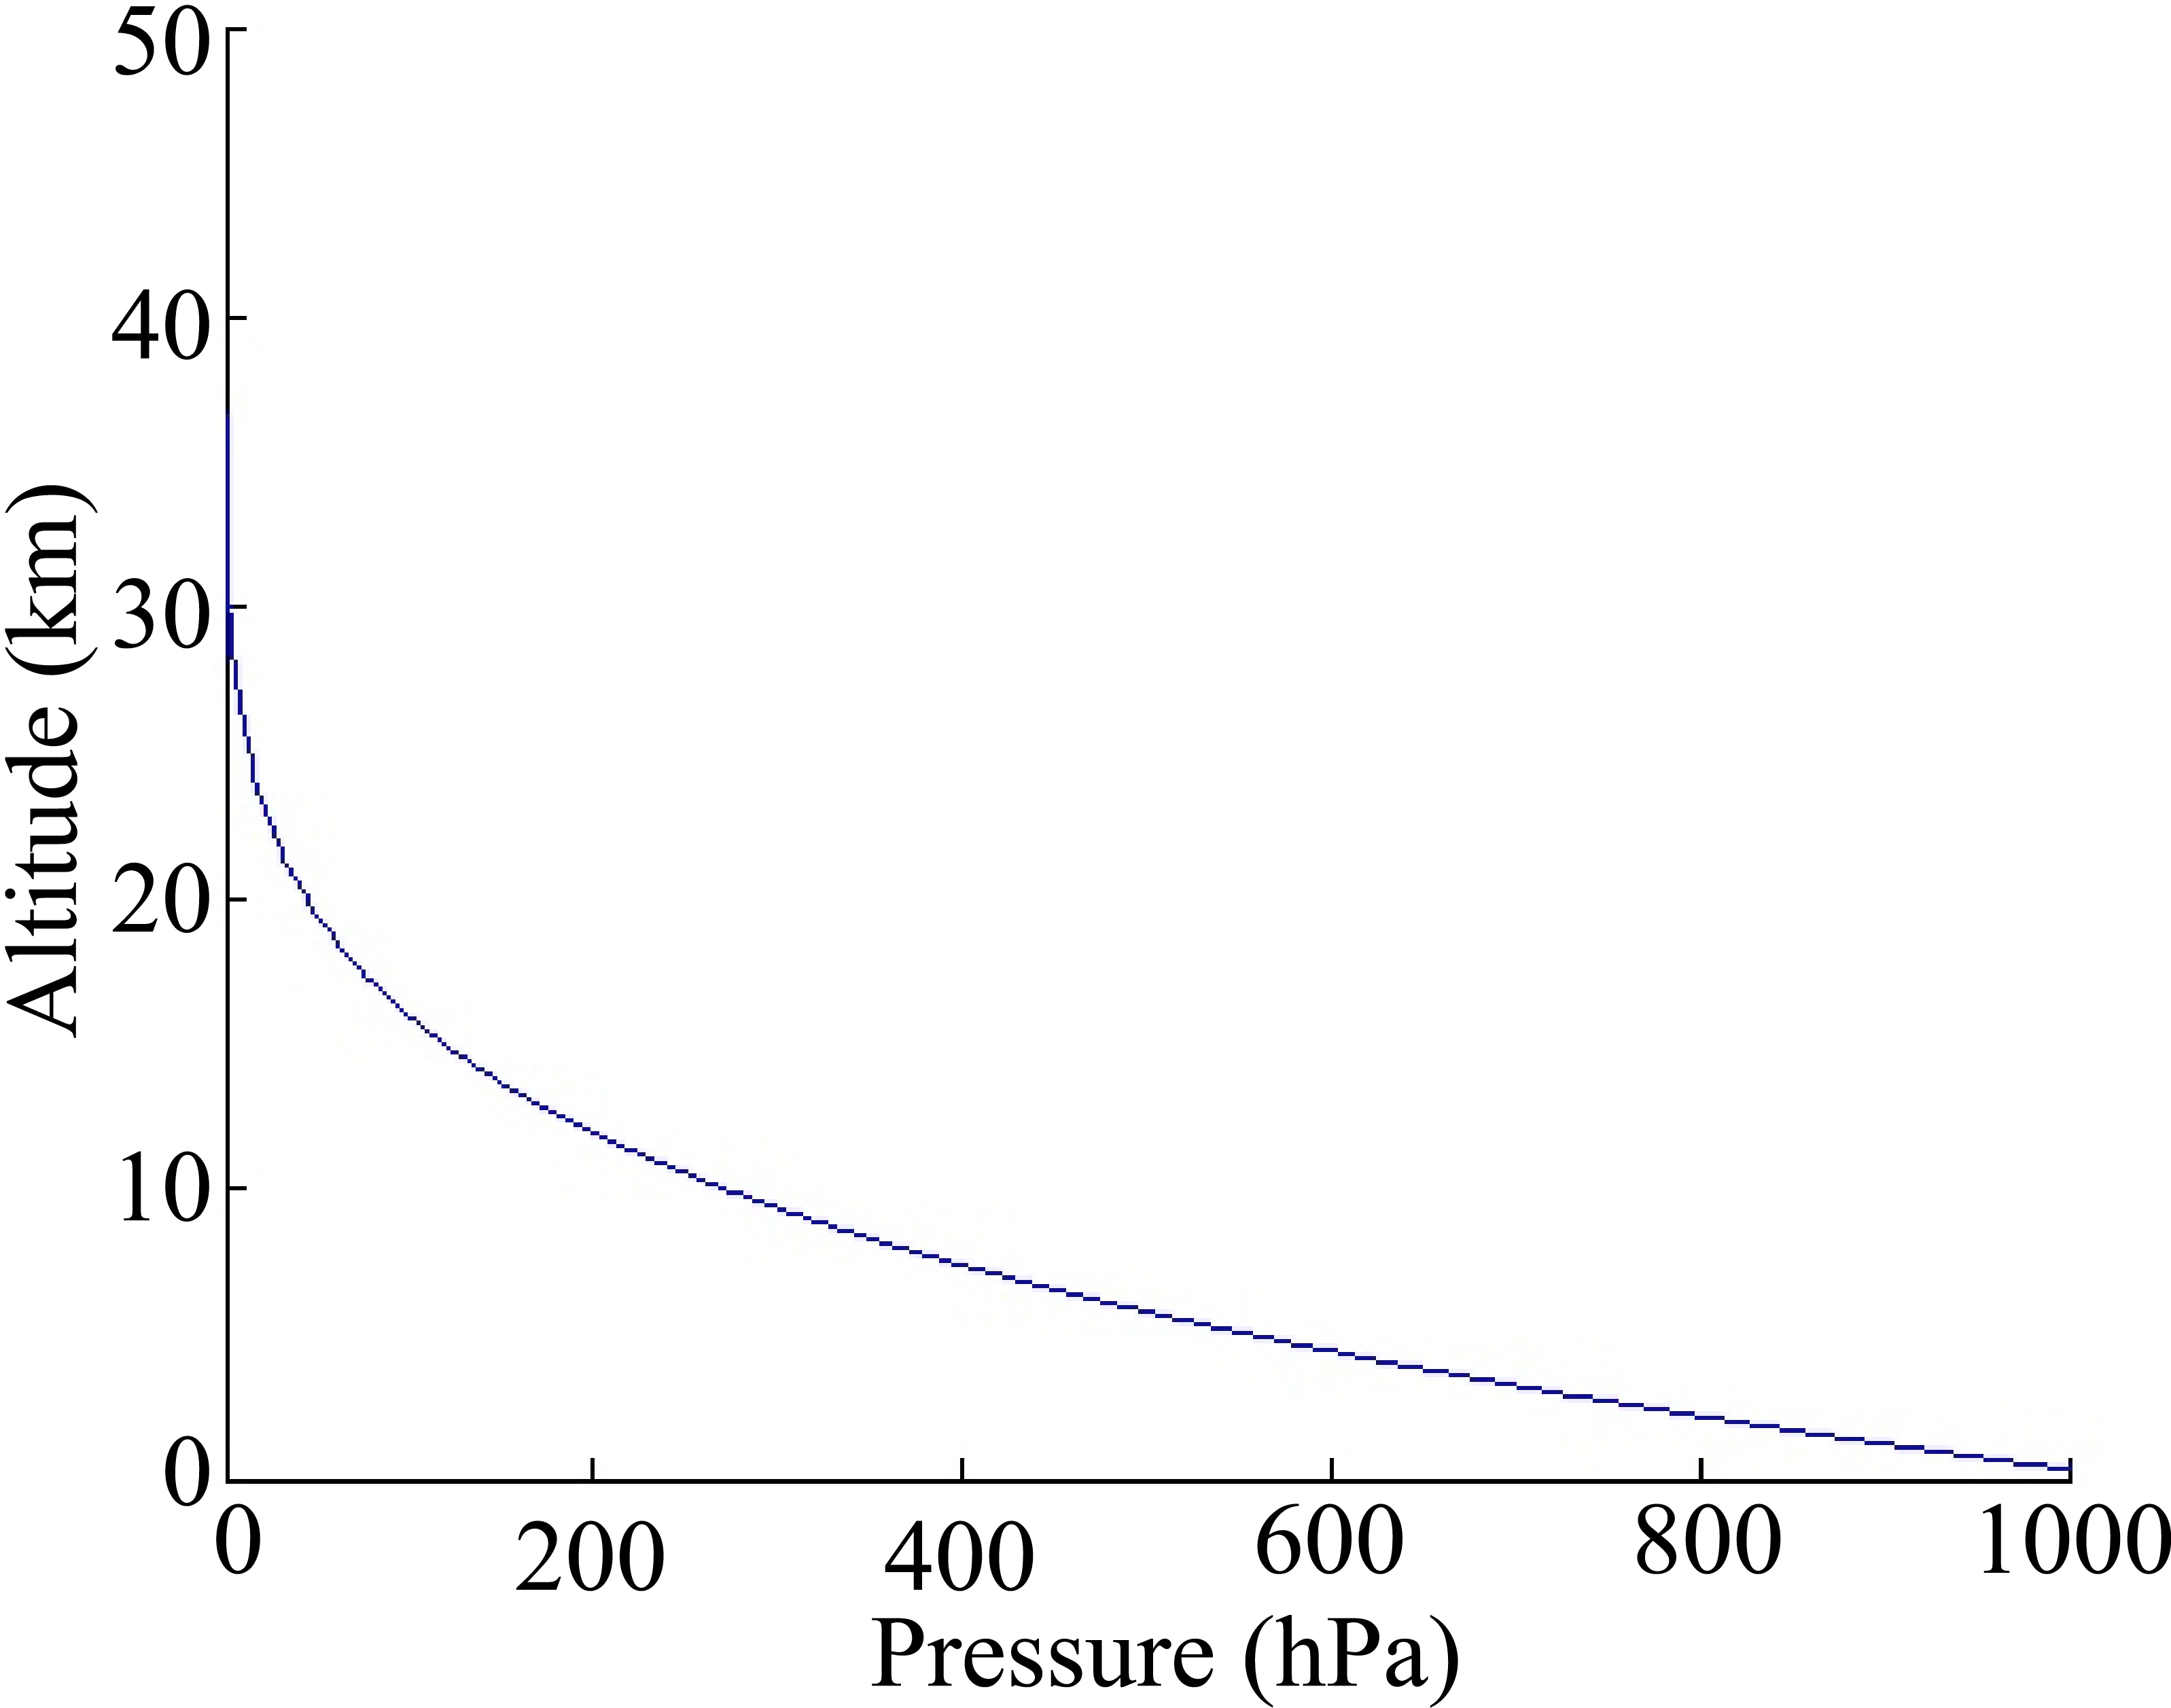 Trend of altitude with air pressure.